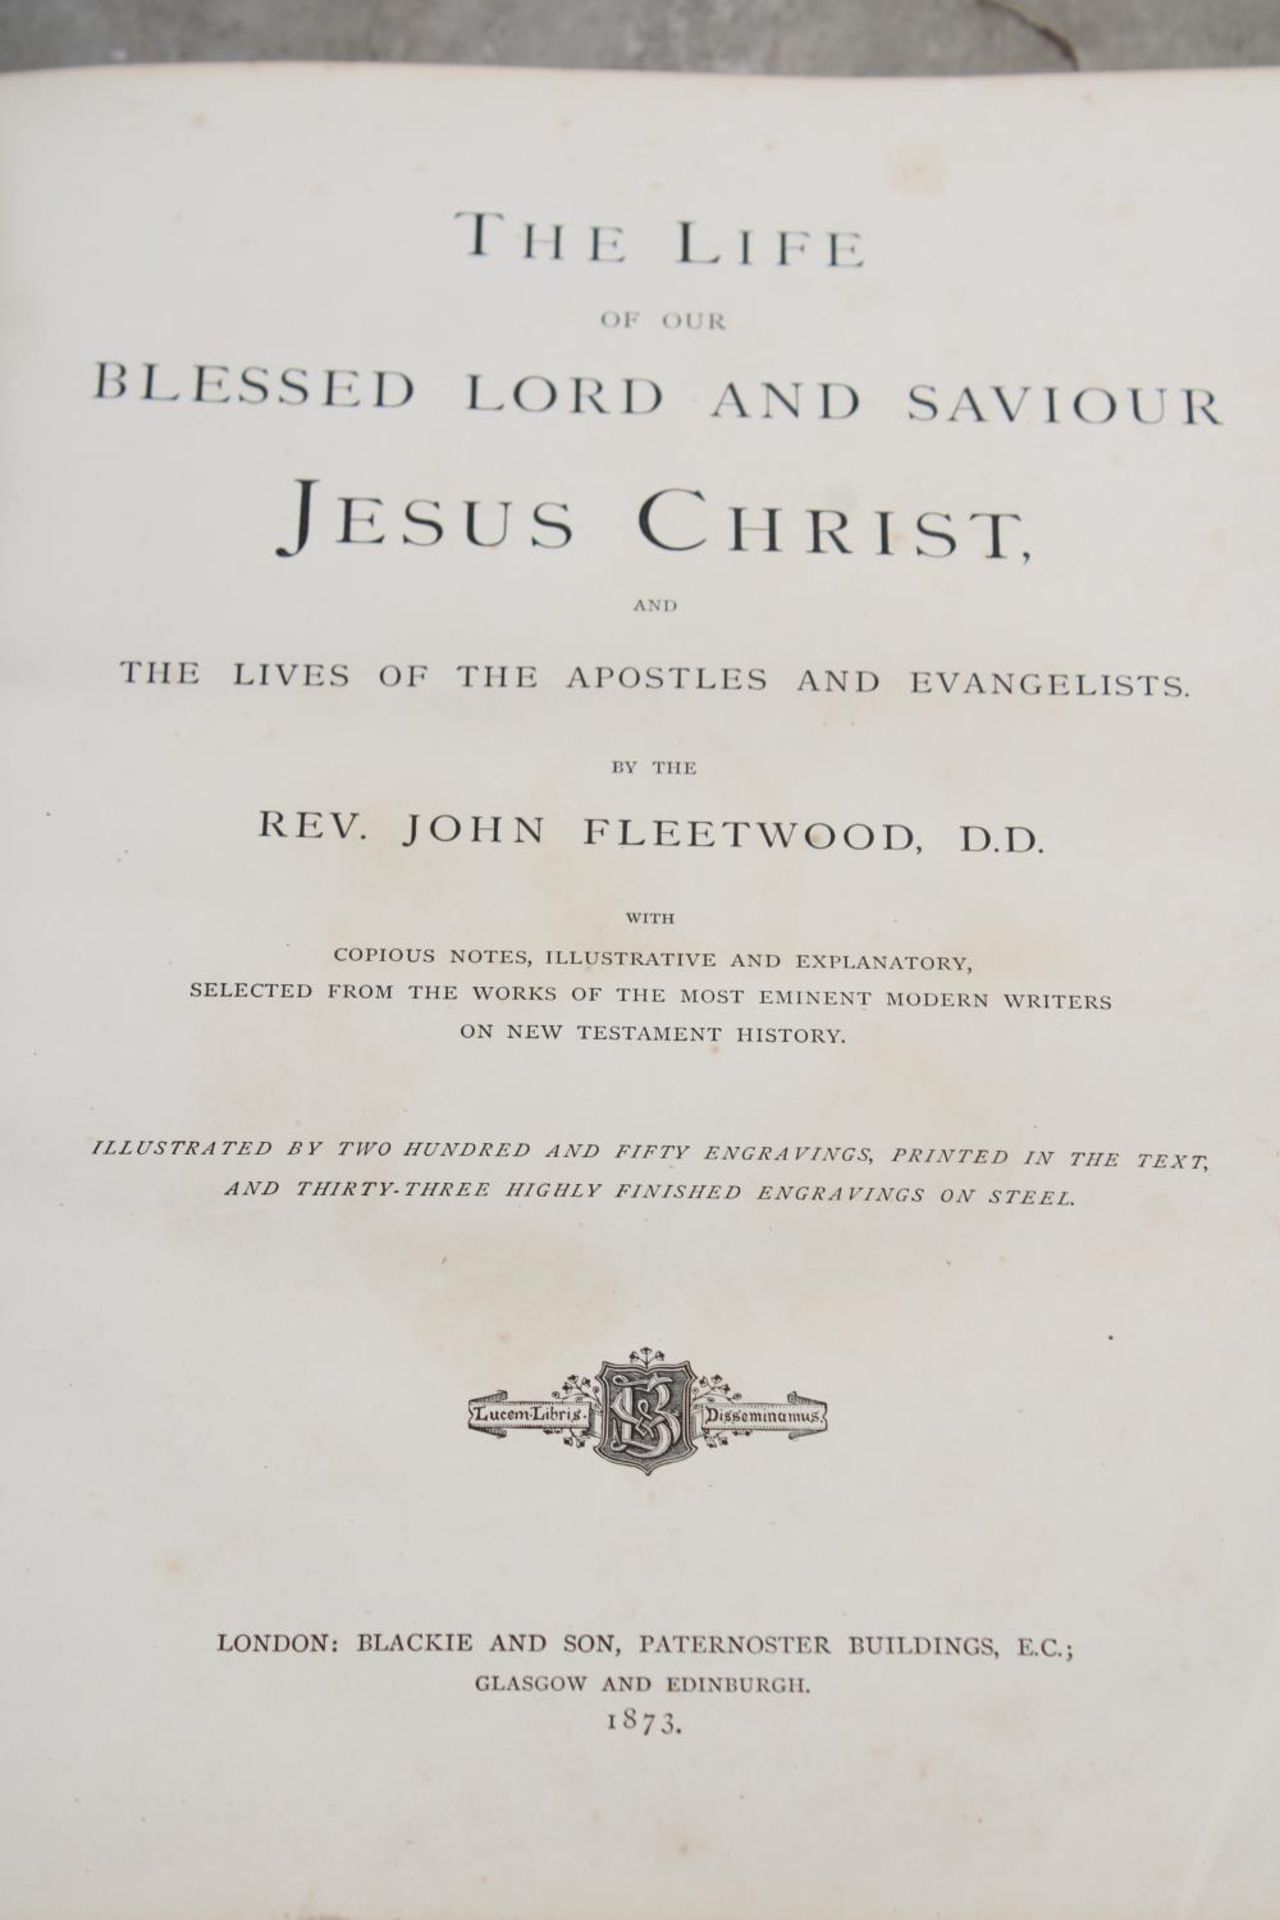 A VINTAGE LEATHER BOUND BOOK 'THE LIFE OF OUR BLESSED LORD AND SAVIOUR JESUS CHRIST' - Image 5 of 5